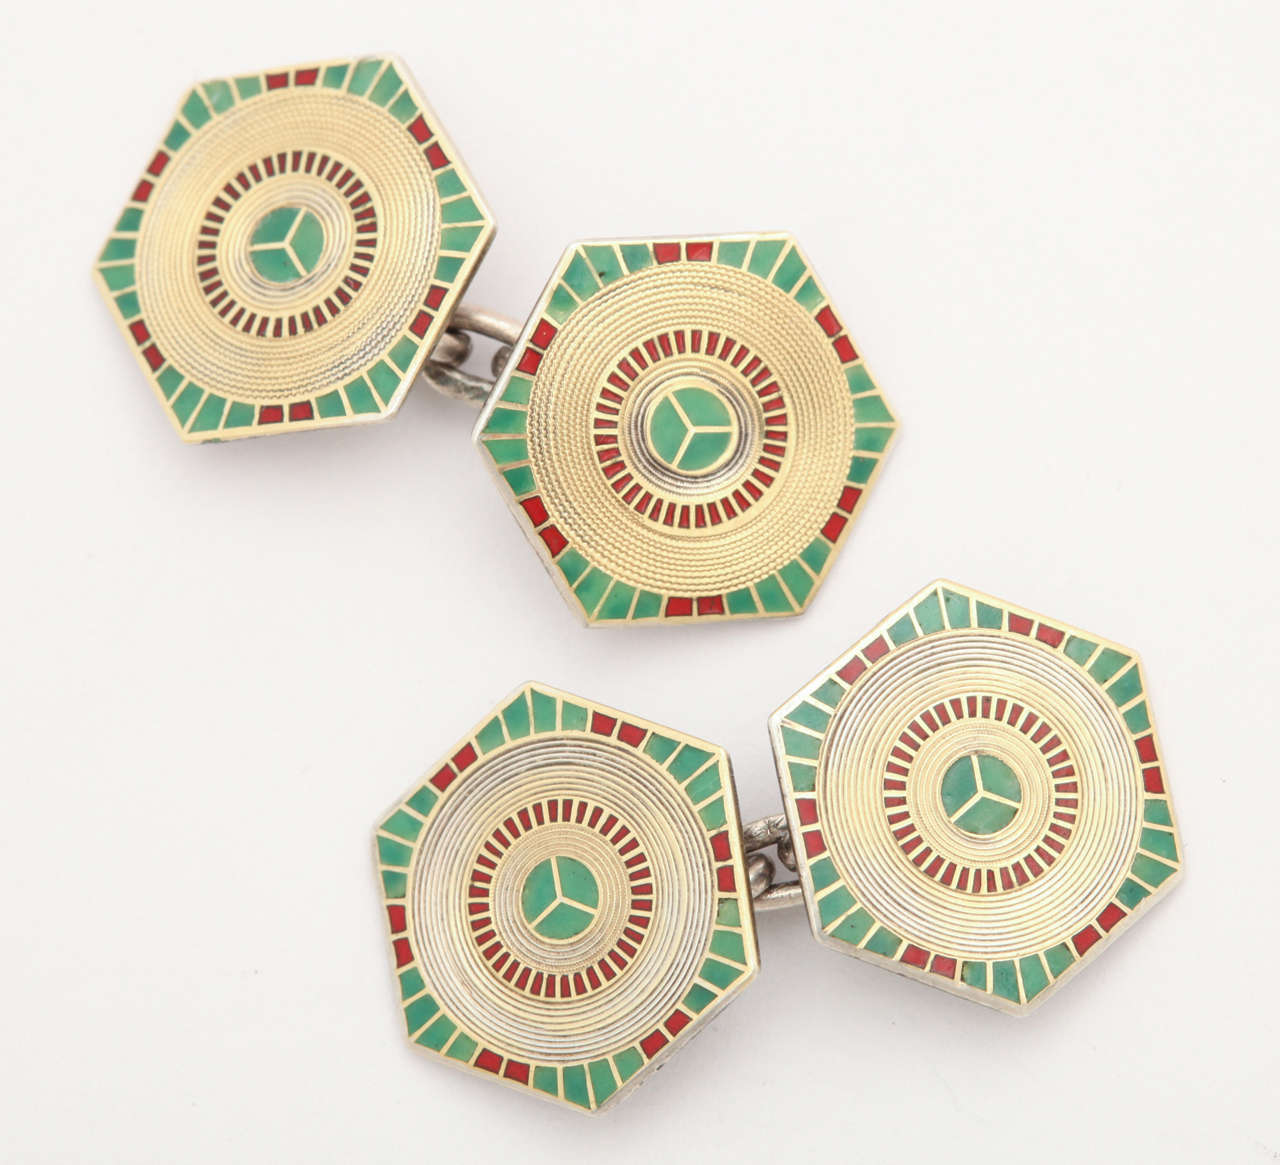 Stunning enamel coloration of gold, green and red make geometry speak in this pair of sterling silver, gold and  enamel cufflinks c. 1920-30. The links, double sided hexagons, show outstanding design.  The center circle of green is surrounded by